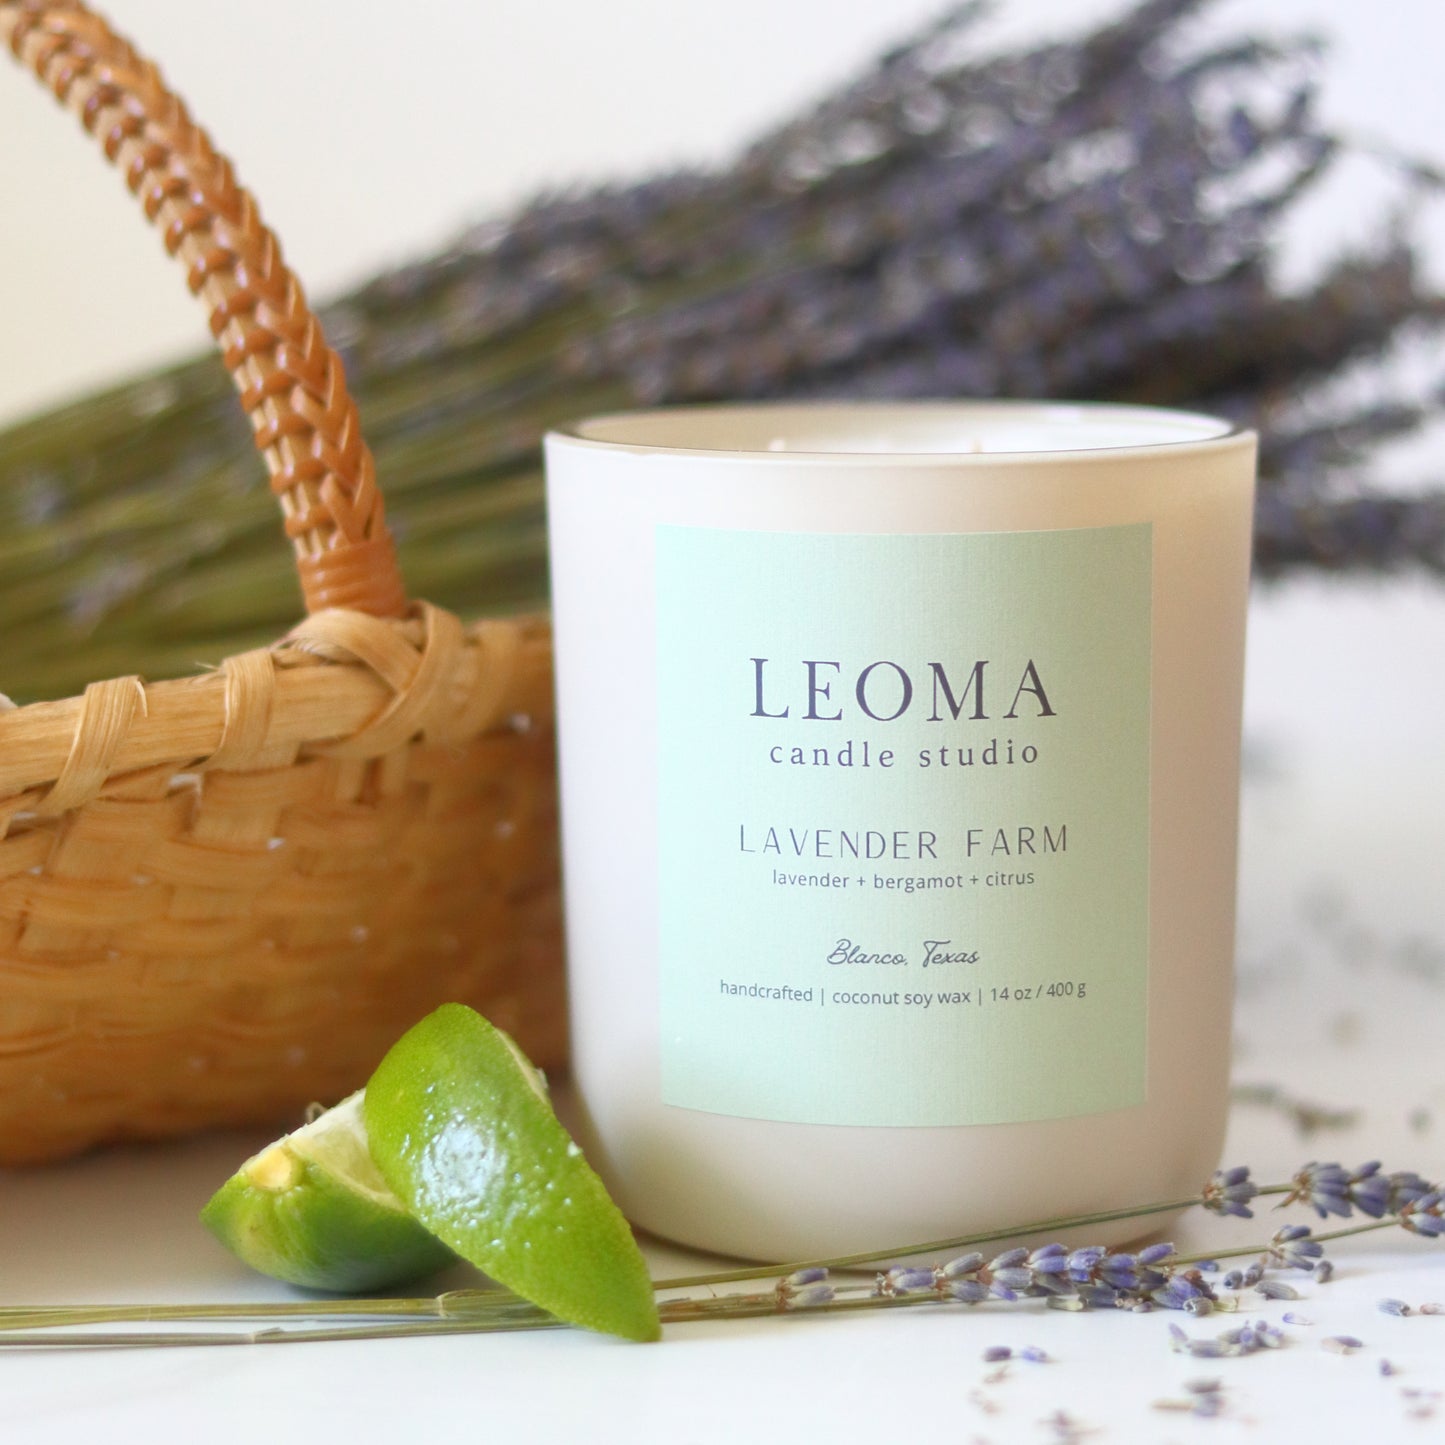 Handcrafted eco-friendly scented candle. Natural coconut & soy wax, toxin-free, 100% cotton wicks. Cream vessel. Lavender Farm classic scented.